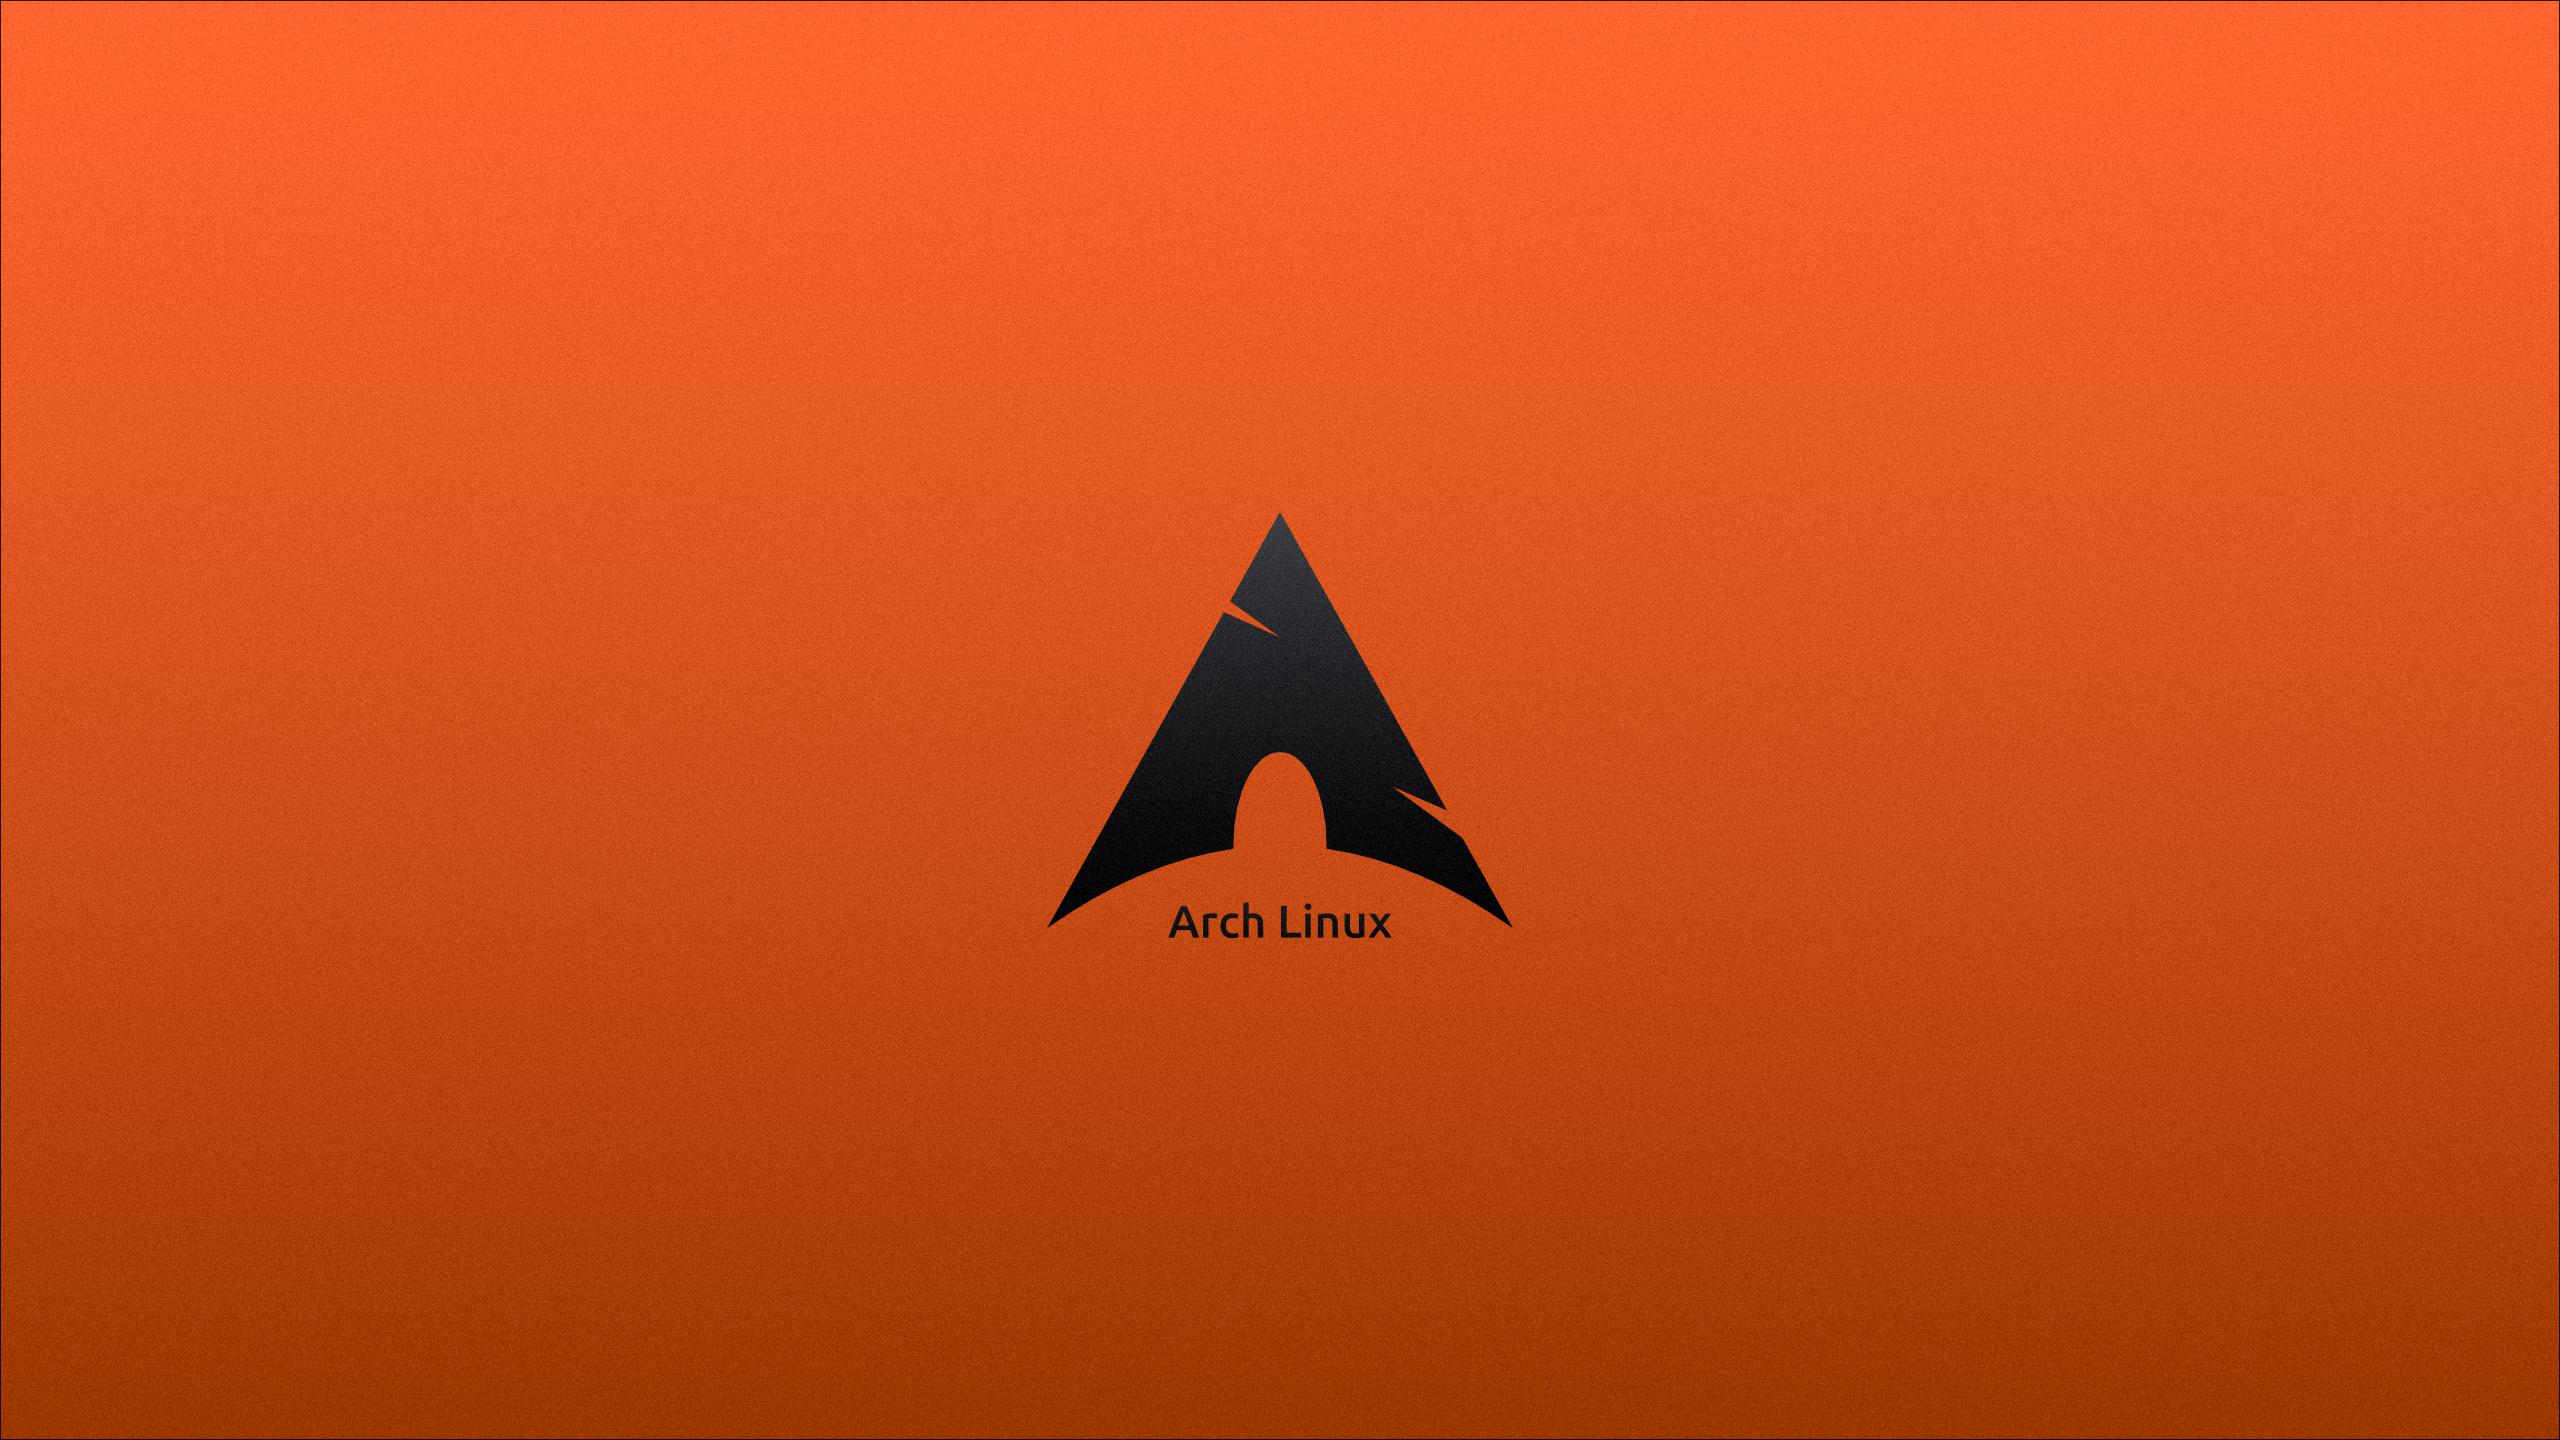 Linux k wallpapers for your desktop or mobile screen free and easy to download